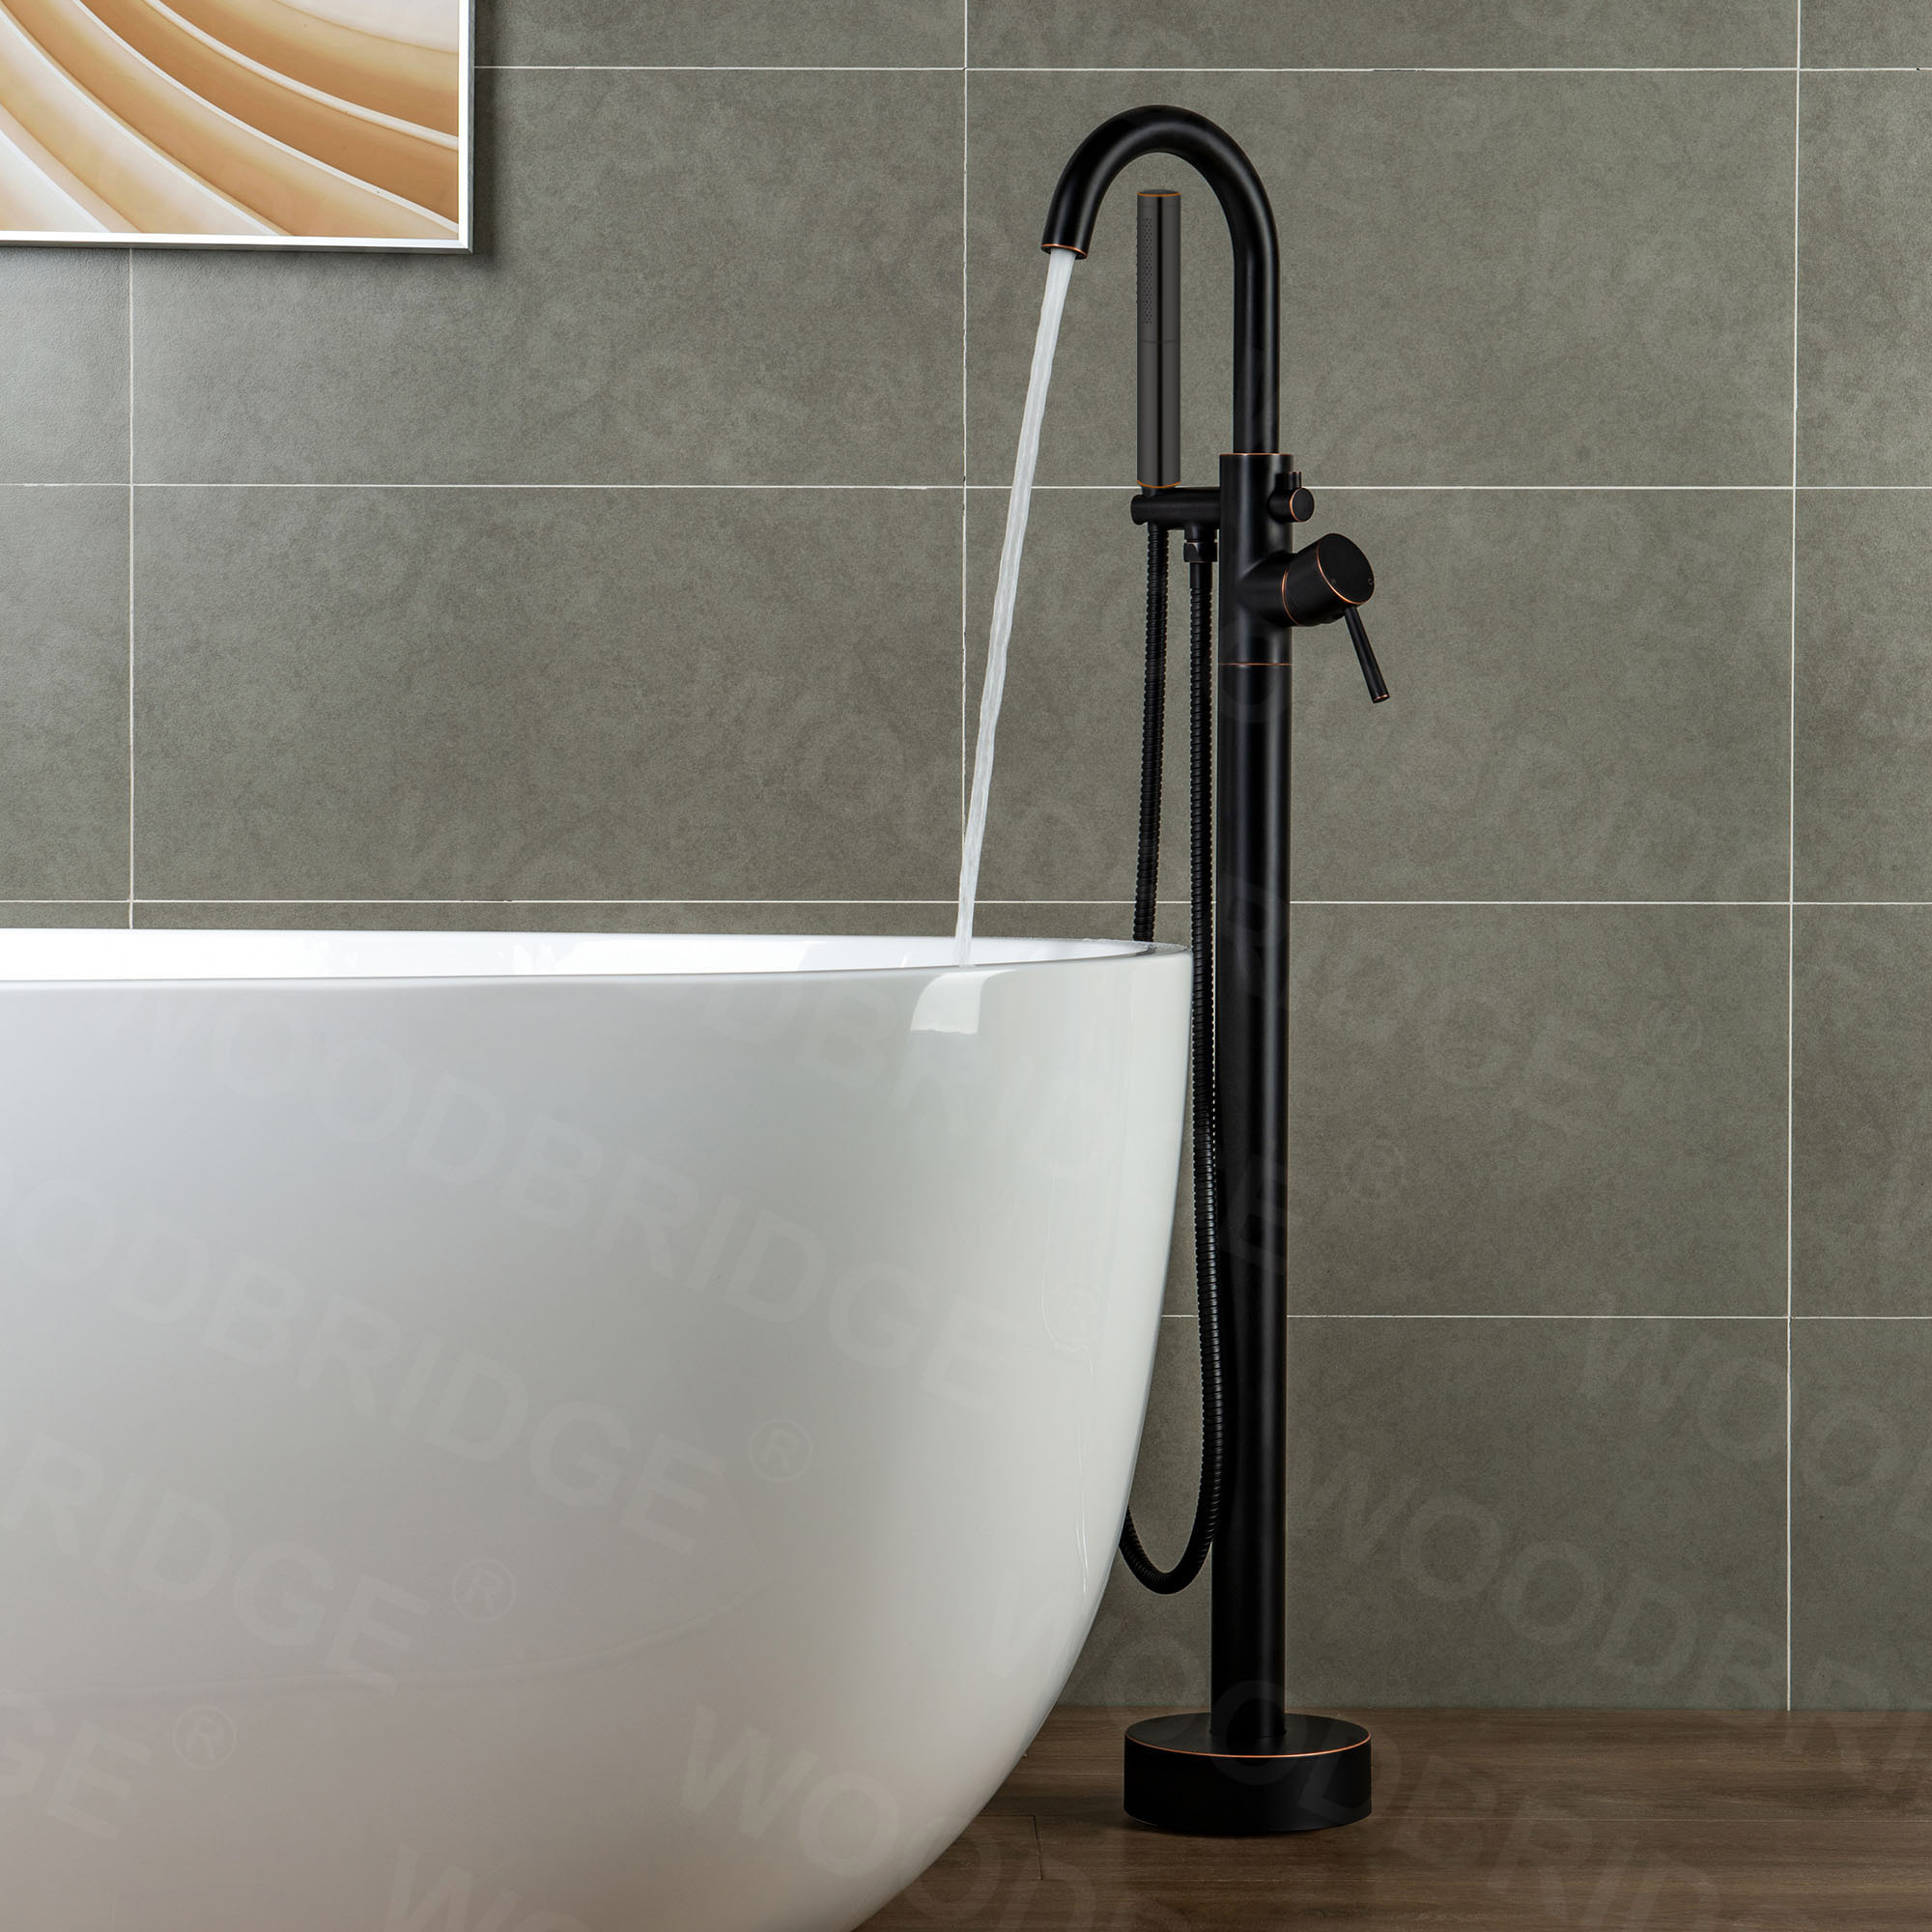  WOODBRIDGE F0010ORBDR Contemporary Single Handle Floor Mount Freestanding Tub Filler Faucet with Hand shower in Oil Rubbed Bronze Finish._14274